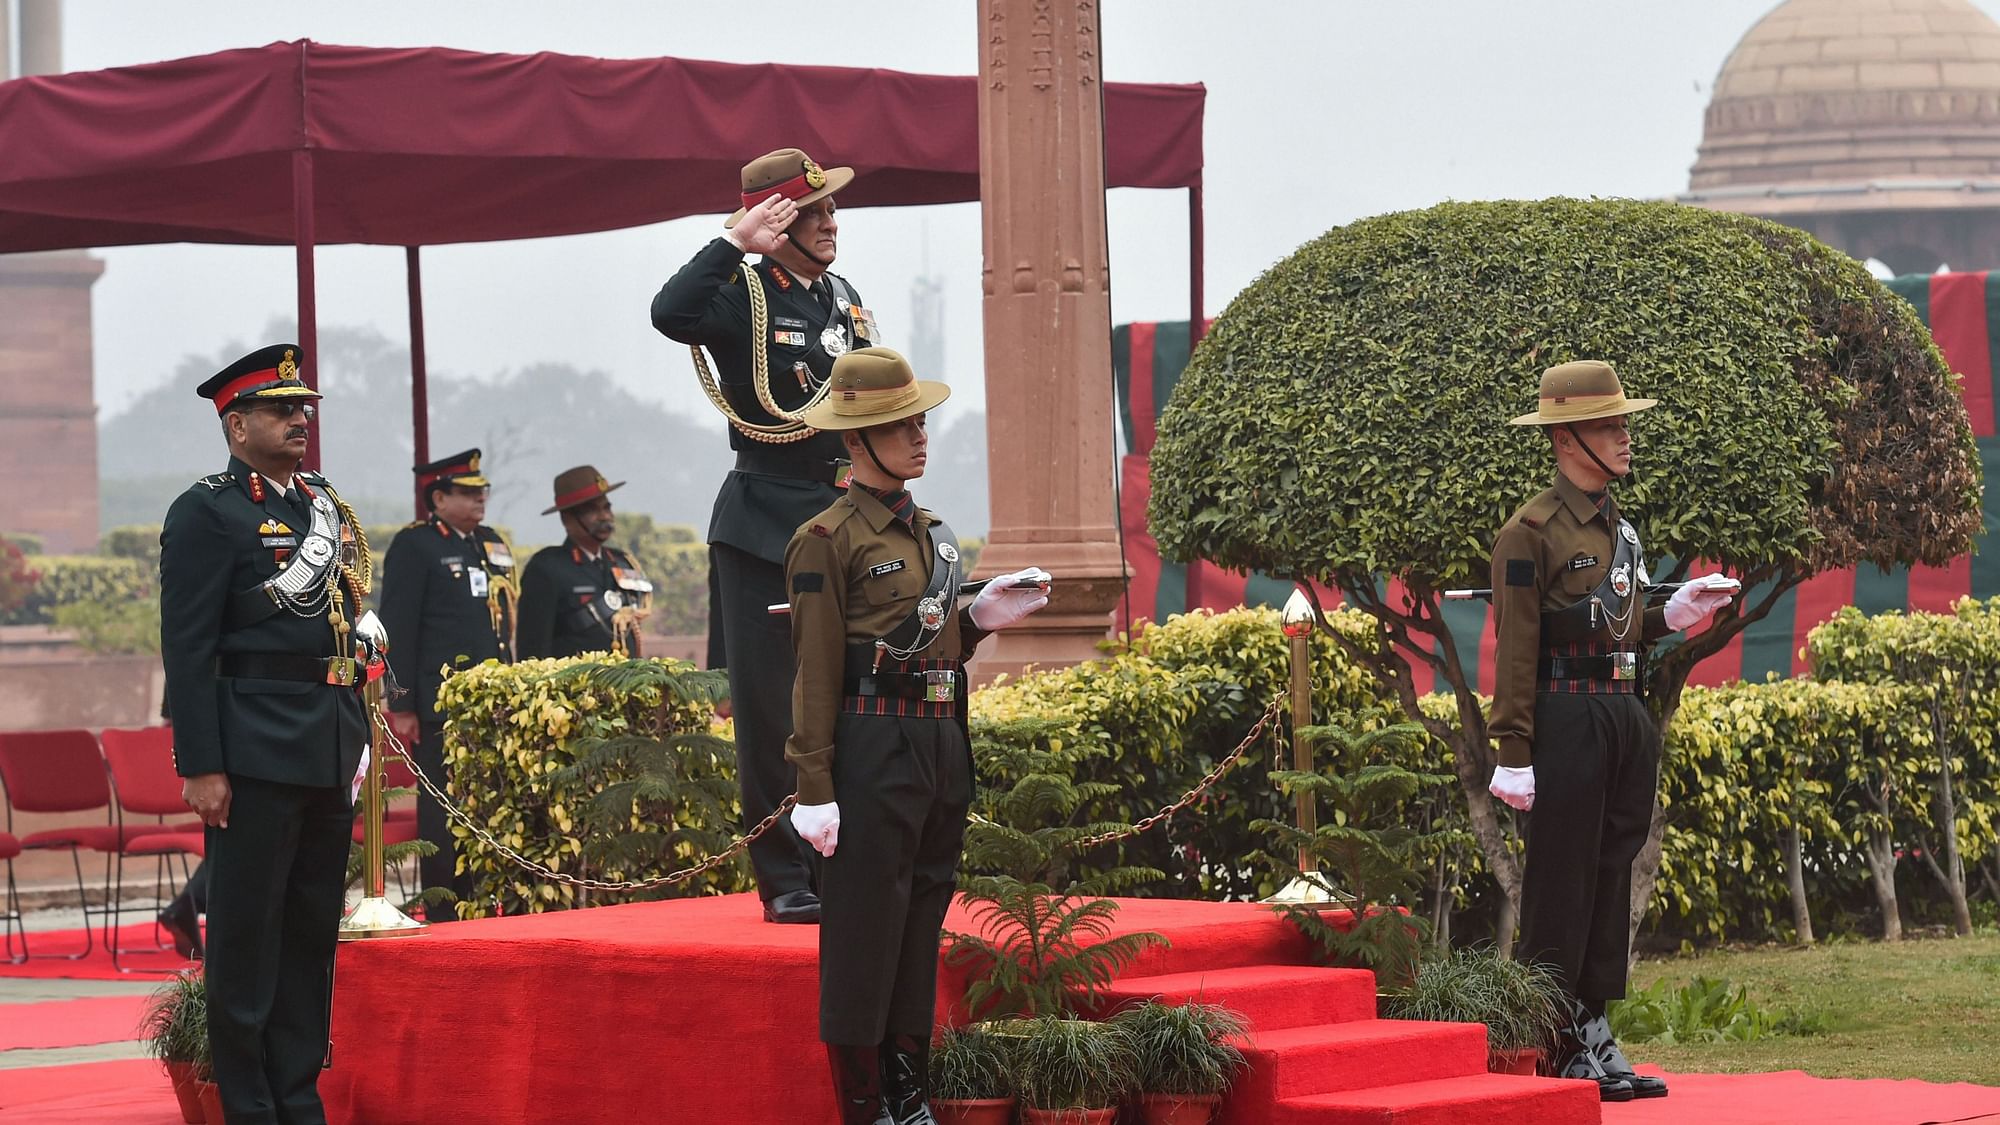  India’s first Chief of Defence Staff (CDS) General Bipin Rawat inspects the Guard of Honour at South Block lawns in New Delhi.